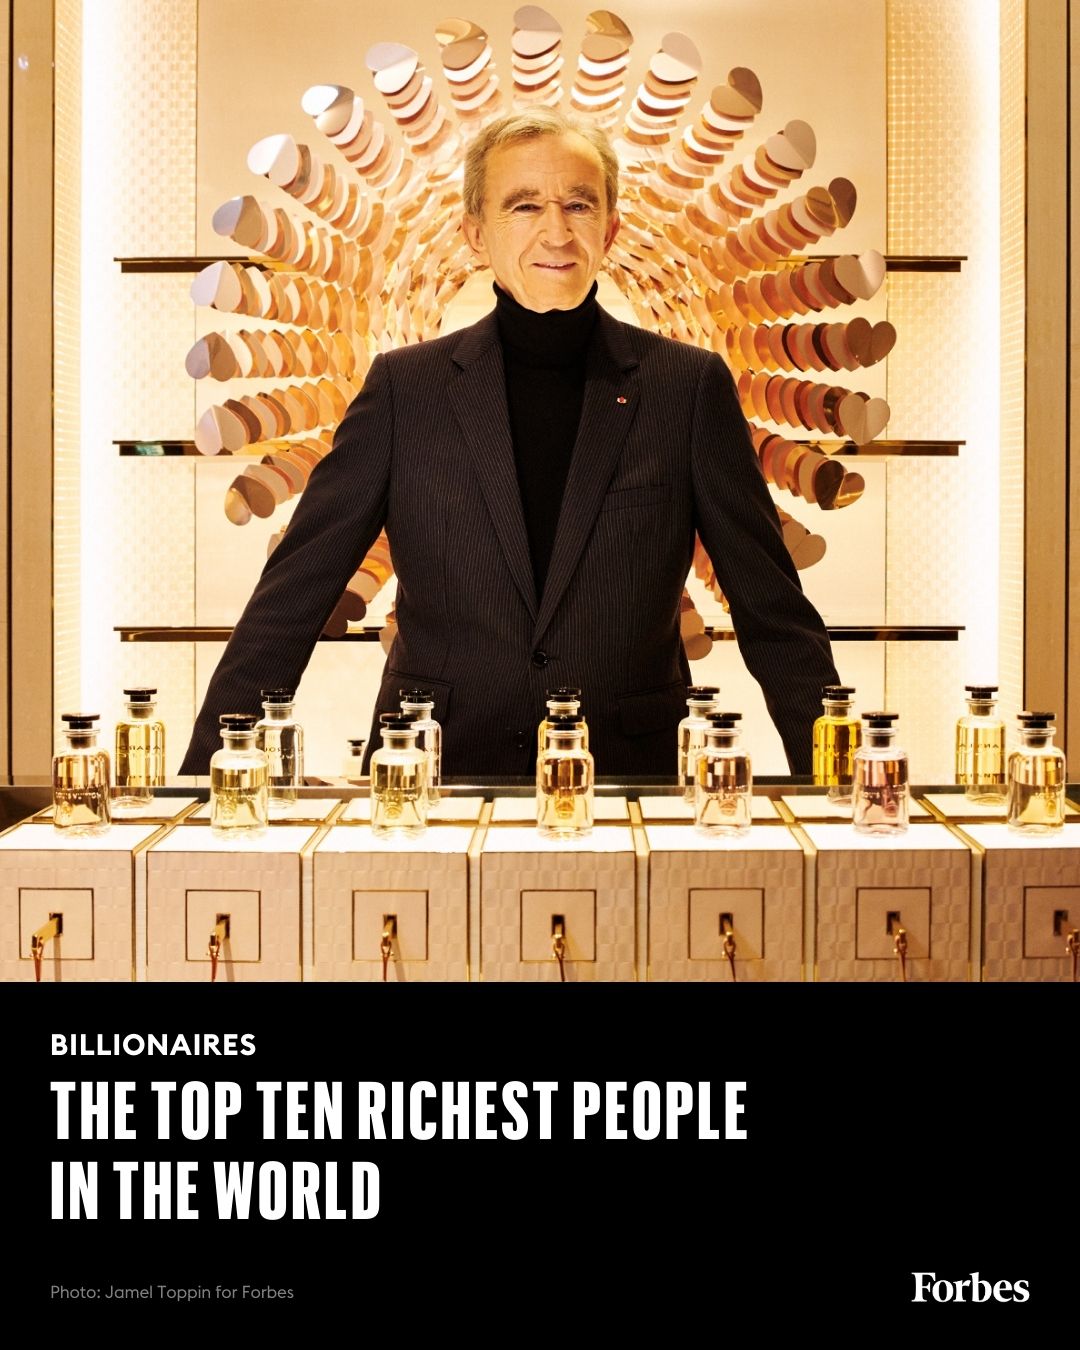 The Top 10 Richest People In The World (December 2023)